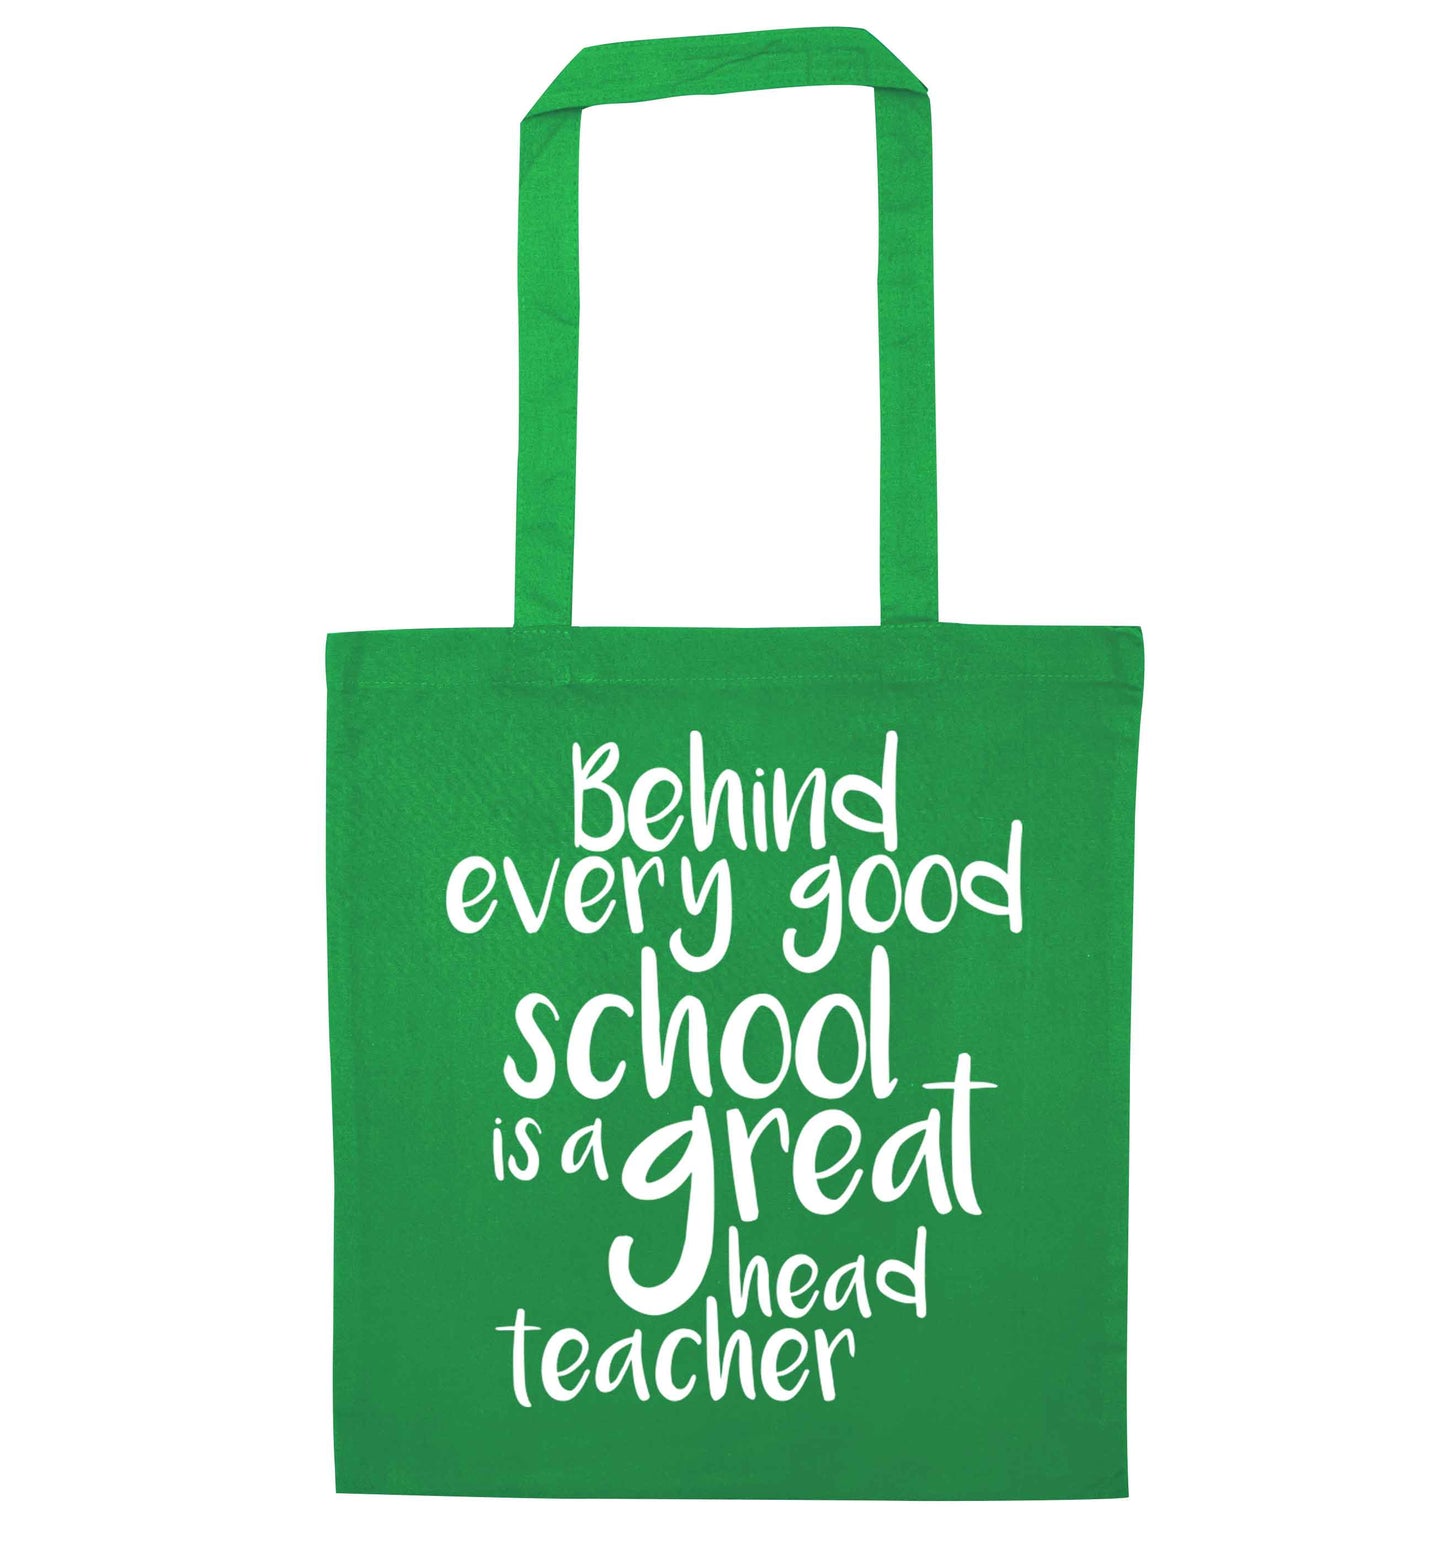 Behind every good school is a great head teacher green tote bag